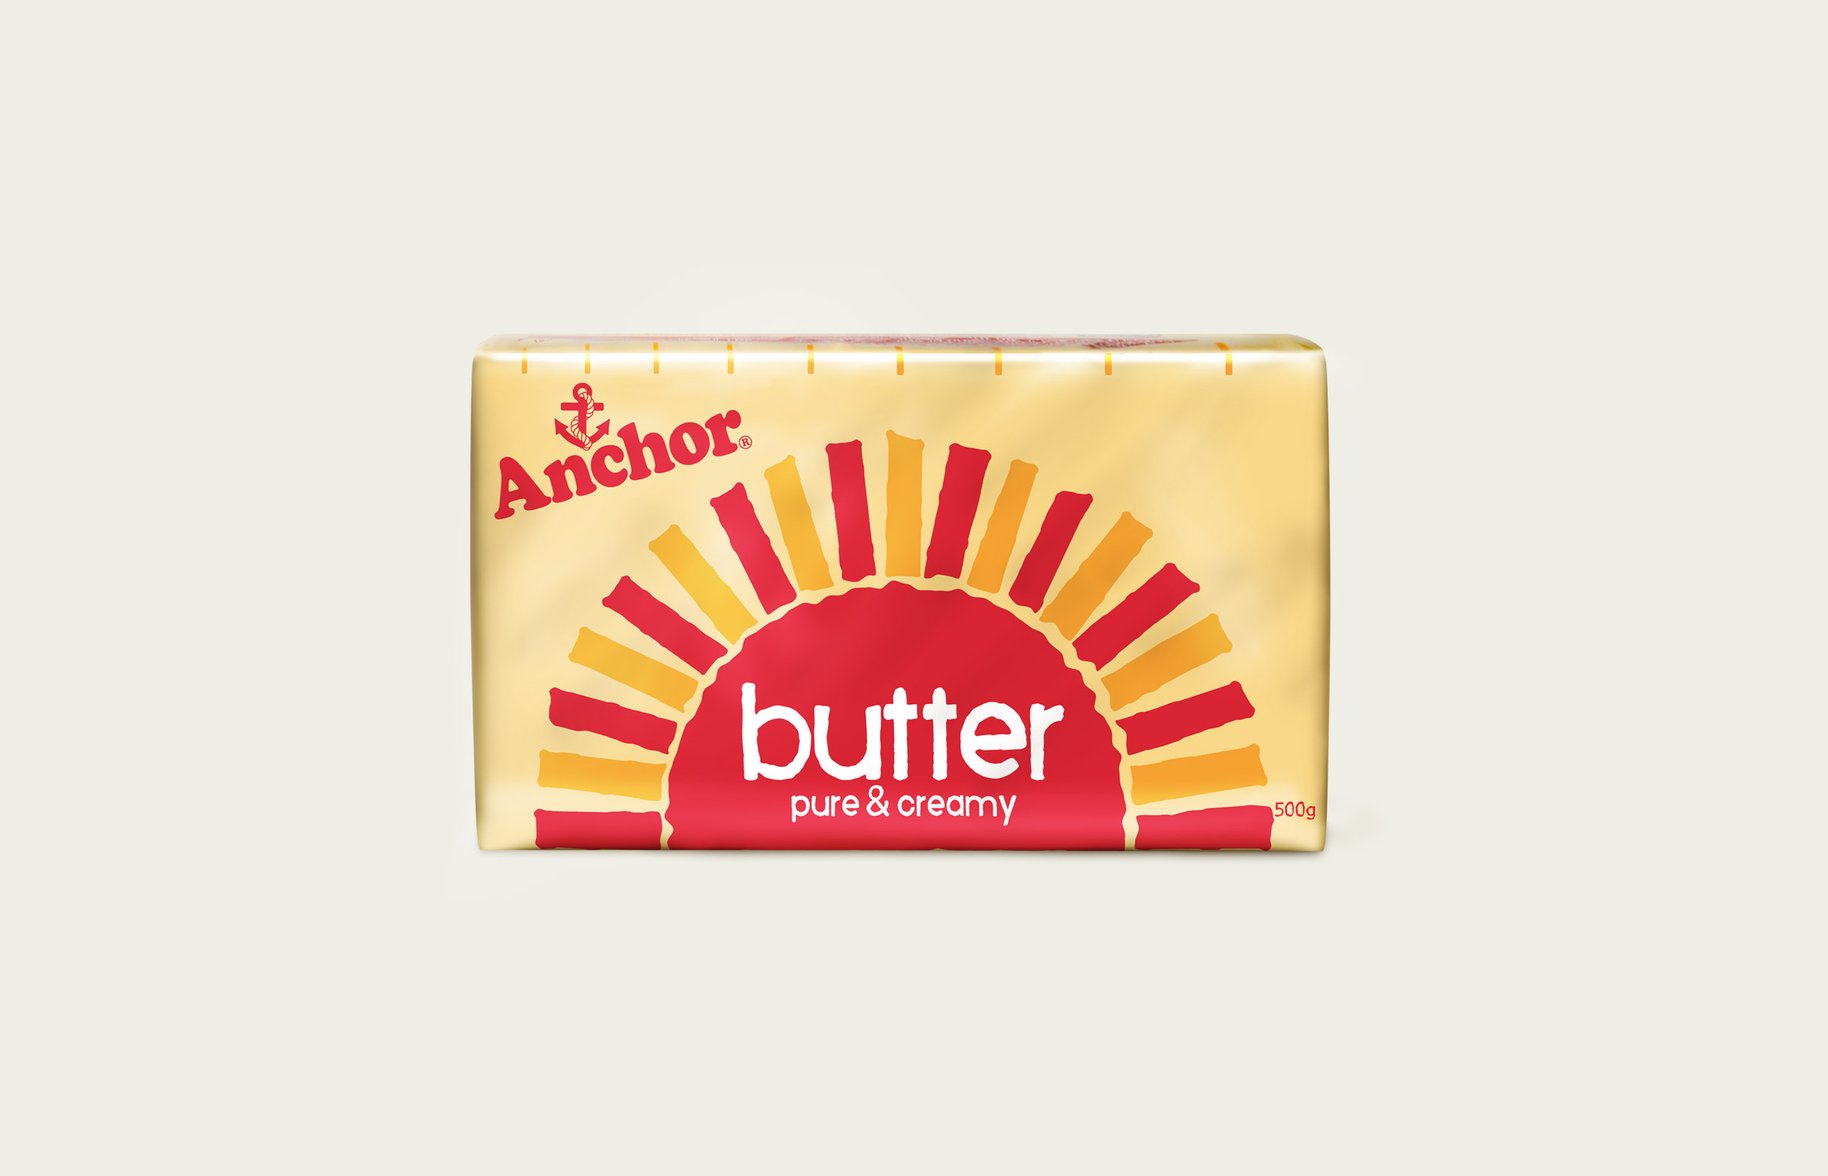 Anchor Domestic Butter packaging 